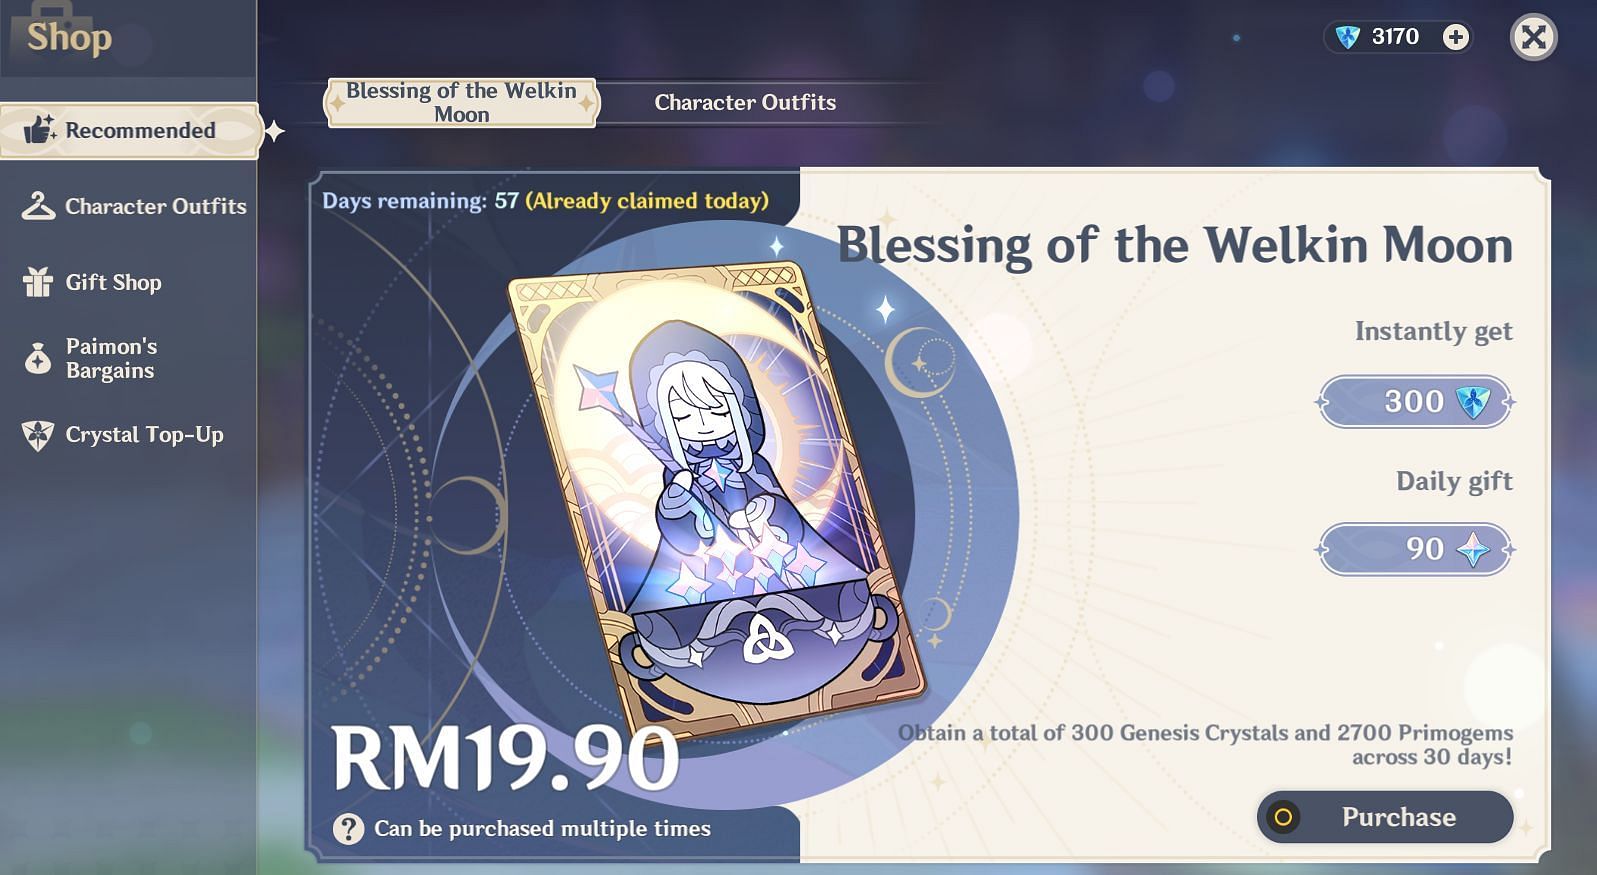 Blessing of the Welkin Moon (Image via Genshin Impact)